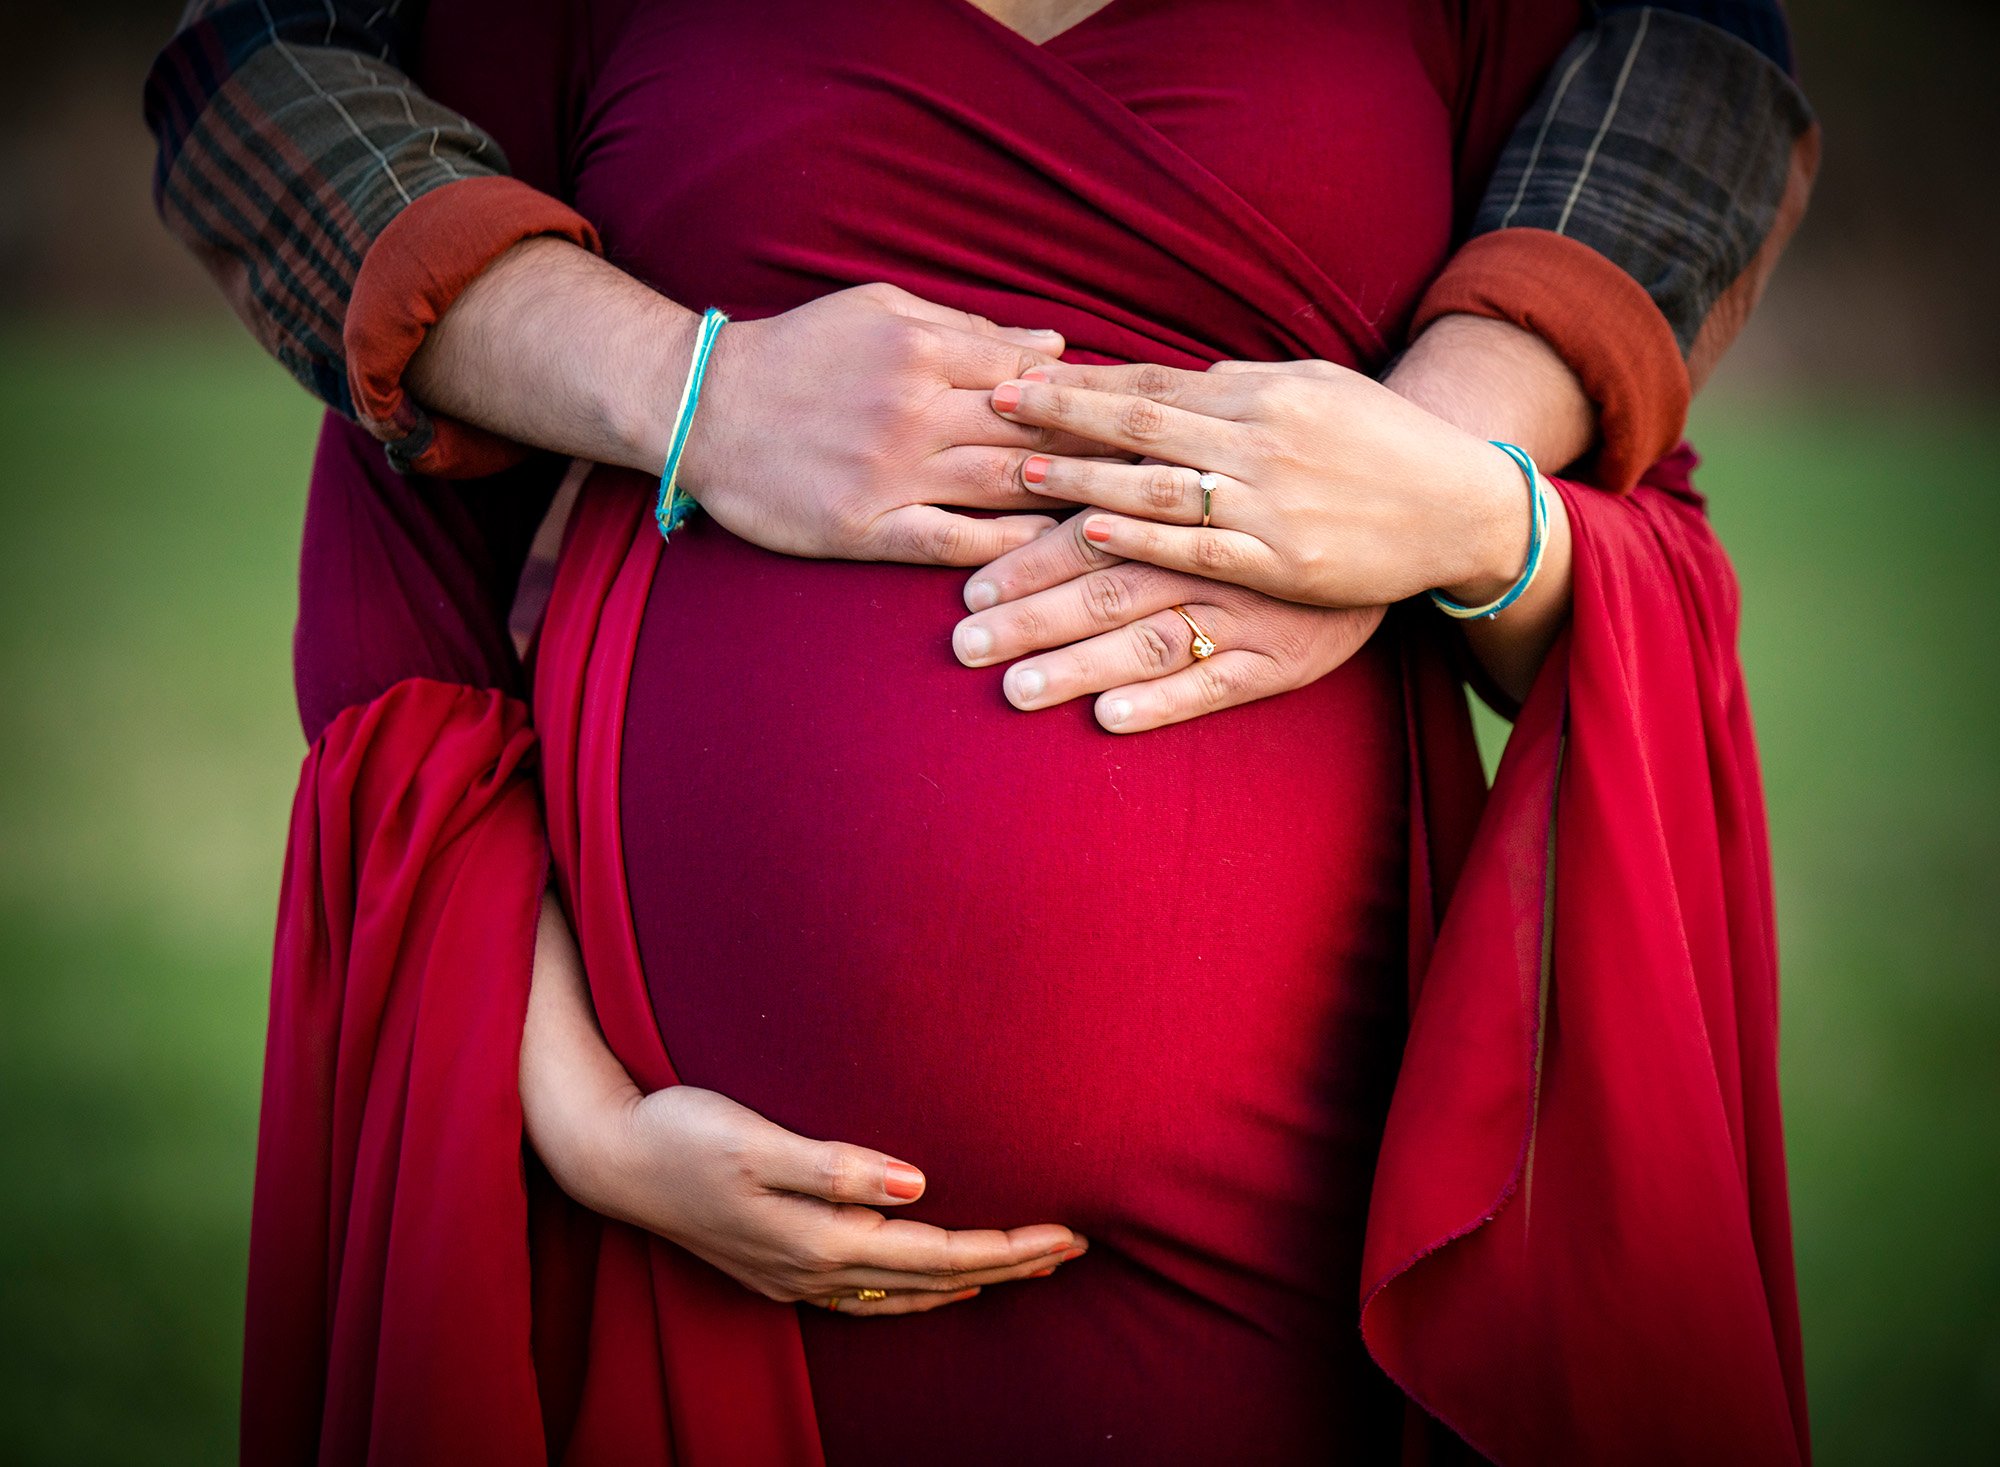 wife and partner holding hands on pregnant baby bump in red dress